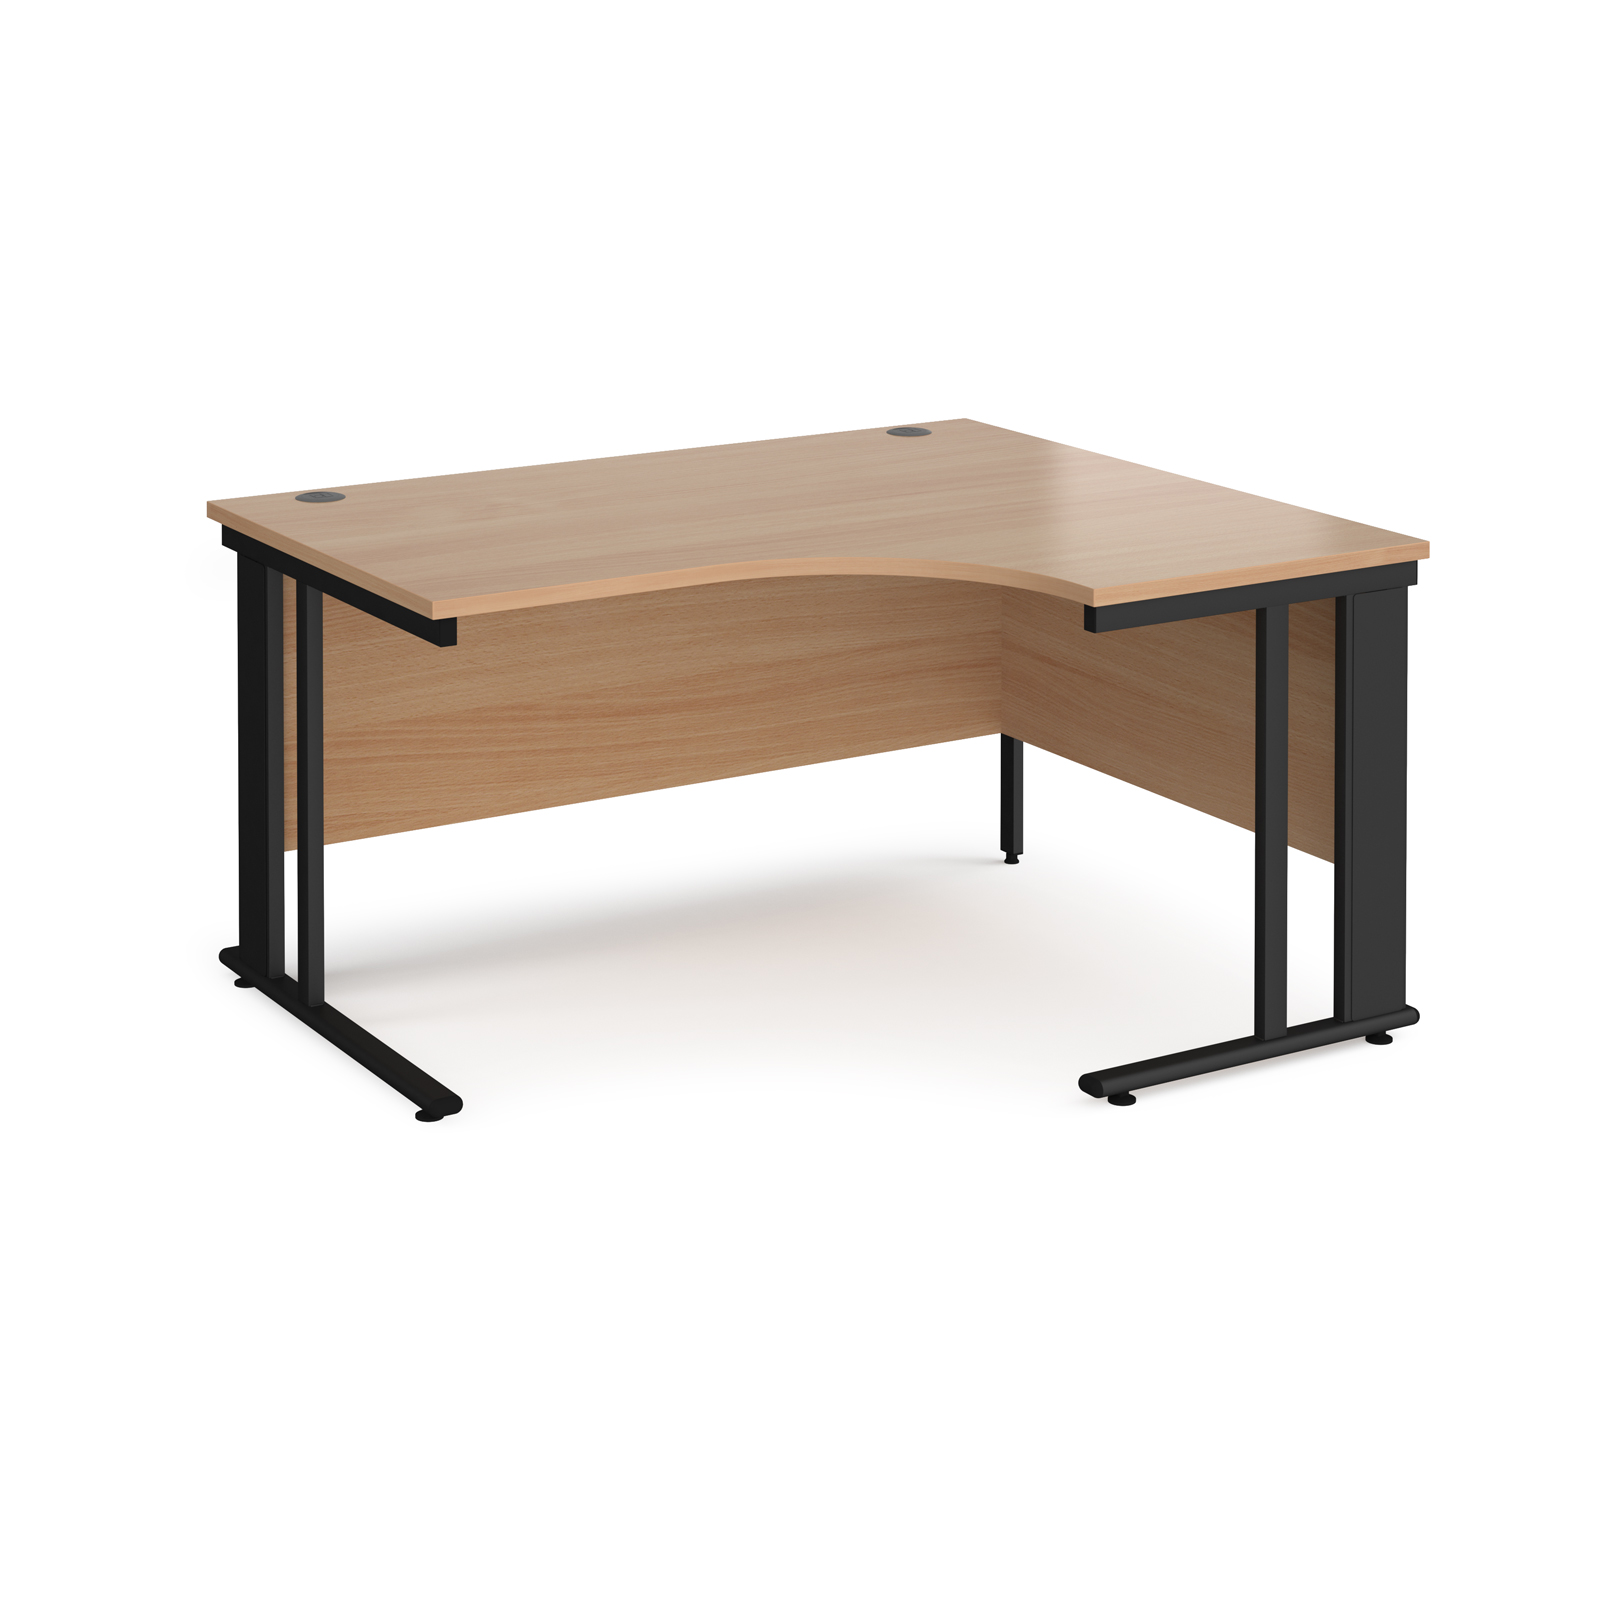 Maestro 25 right hand ergonomic desk 1400mm wide - black cable managed leg frame, beech top